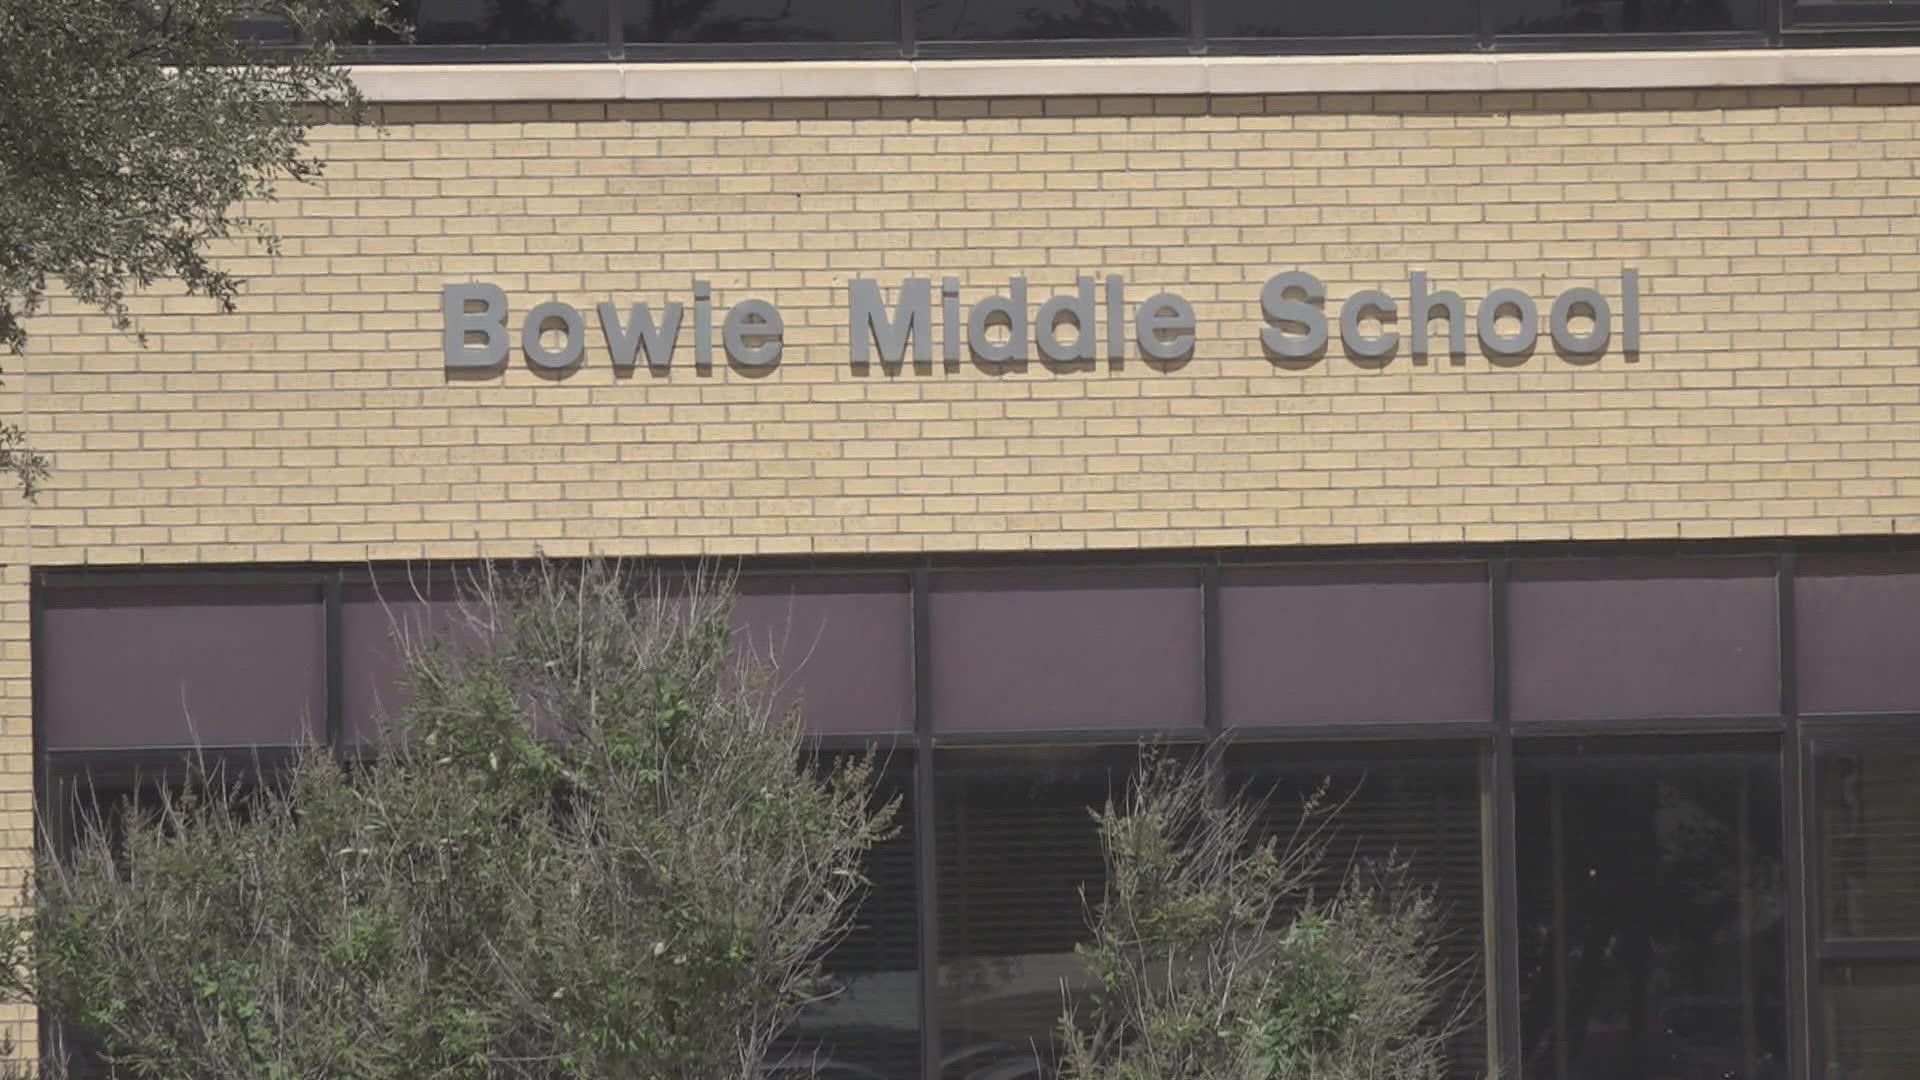 With the Bowie Middle School altercation sweeping the news, bystanders in the video sat and watched.